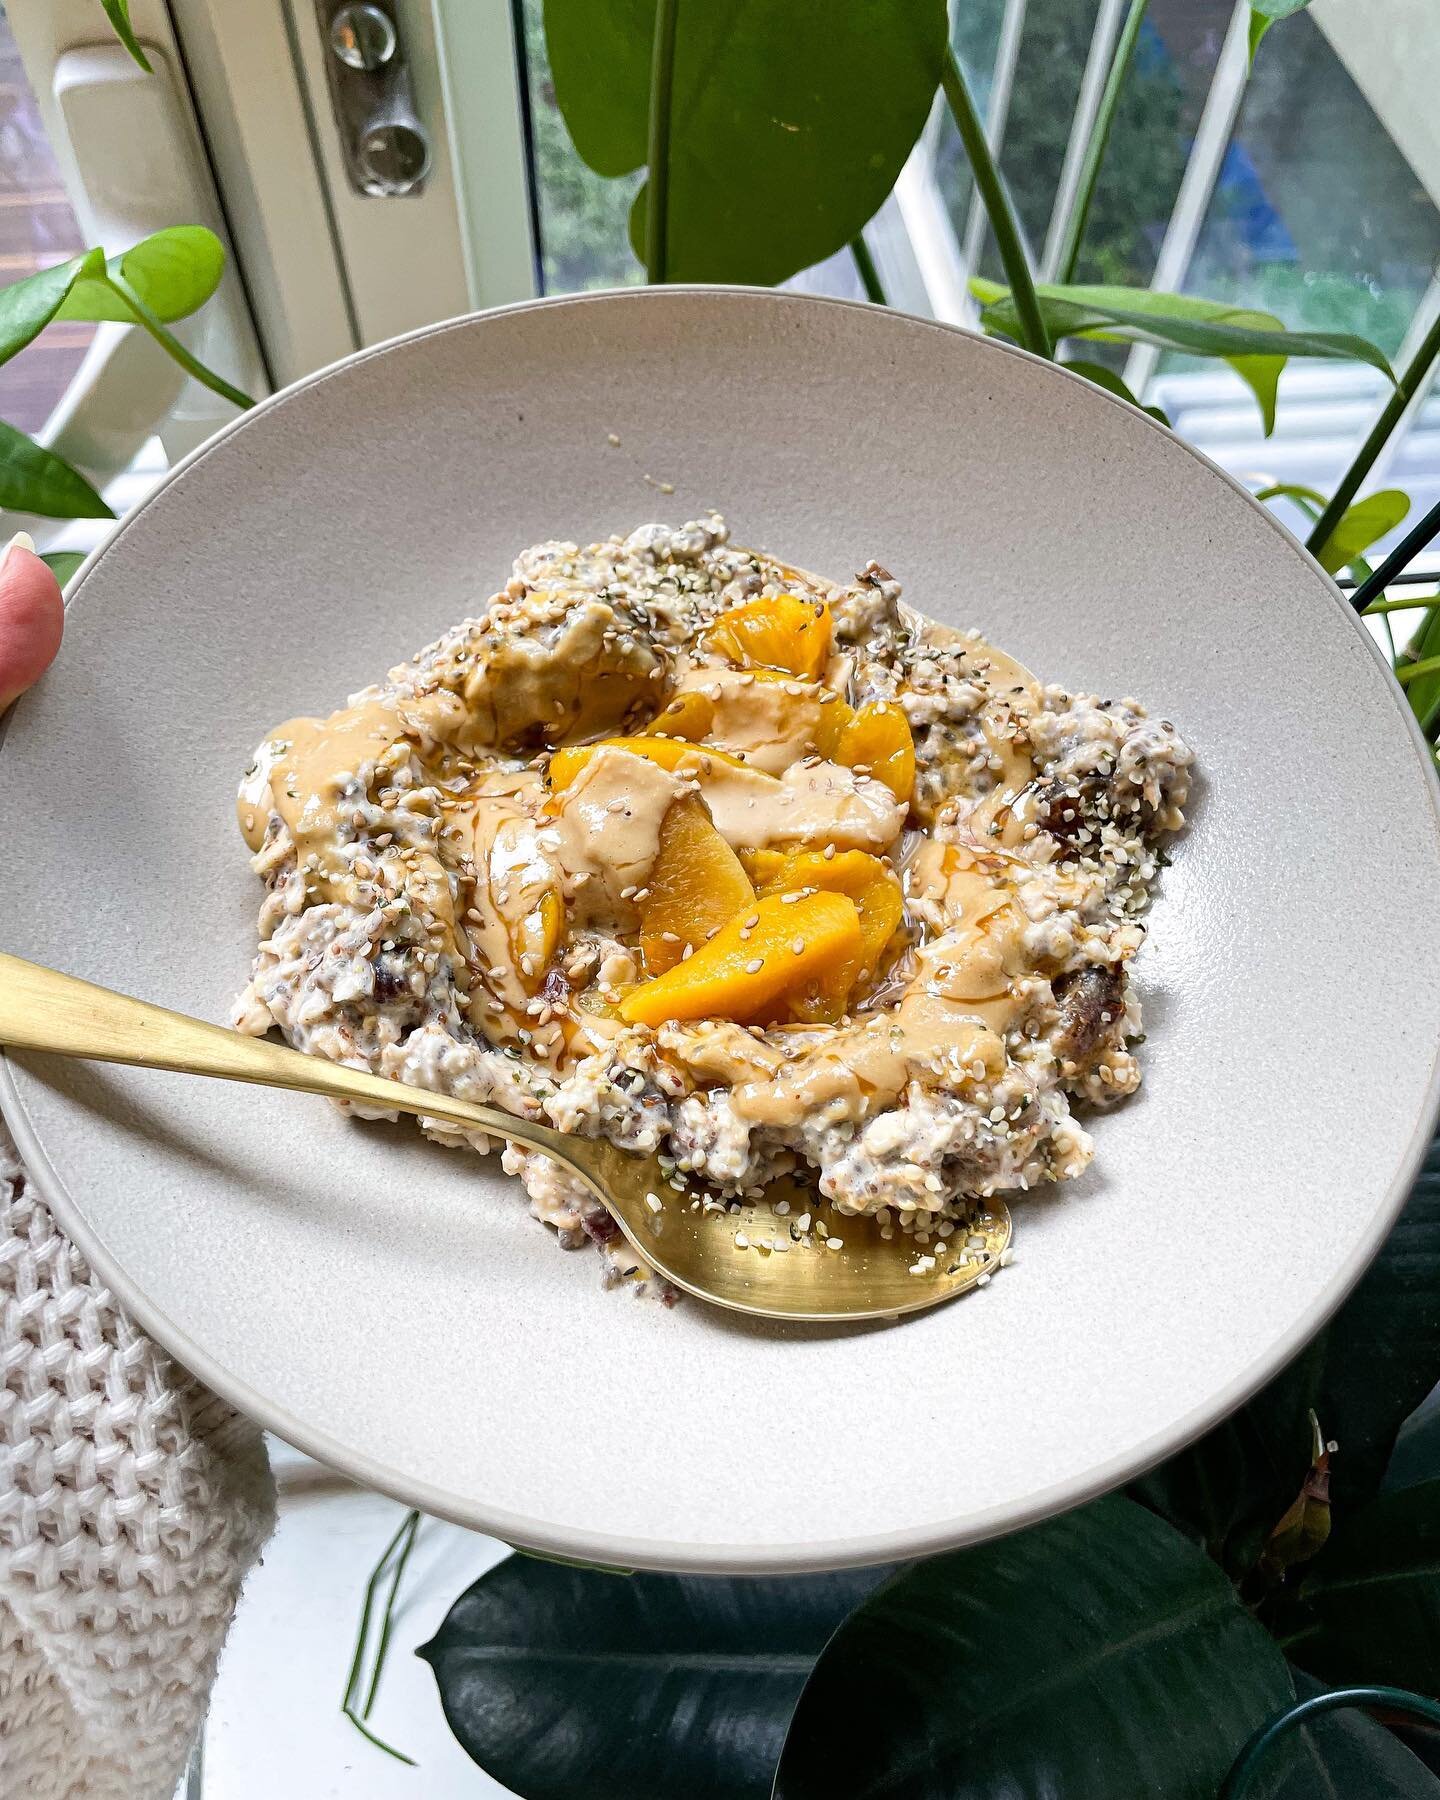 back to reality with these tahini and peach overnight oats ✨ @hungryroot x @purely_elizabeth oatmeal with @califiafarms almond milk, @jooliesdates, honey, tahini, peaches, hemp and toasted sesame seeds 🍯🐝